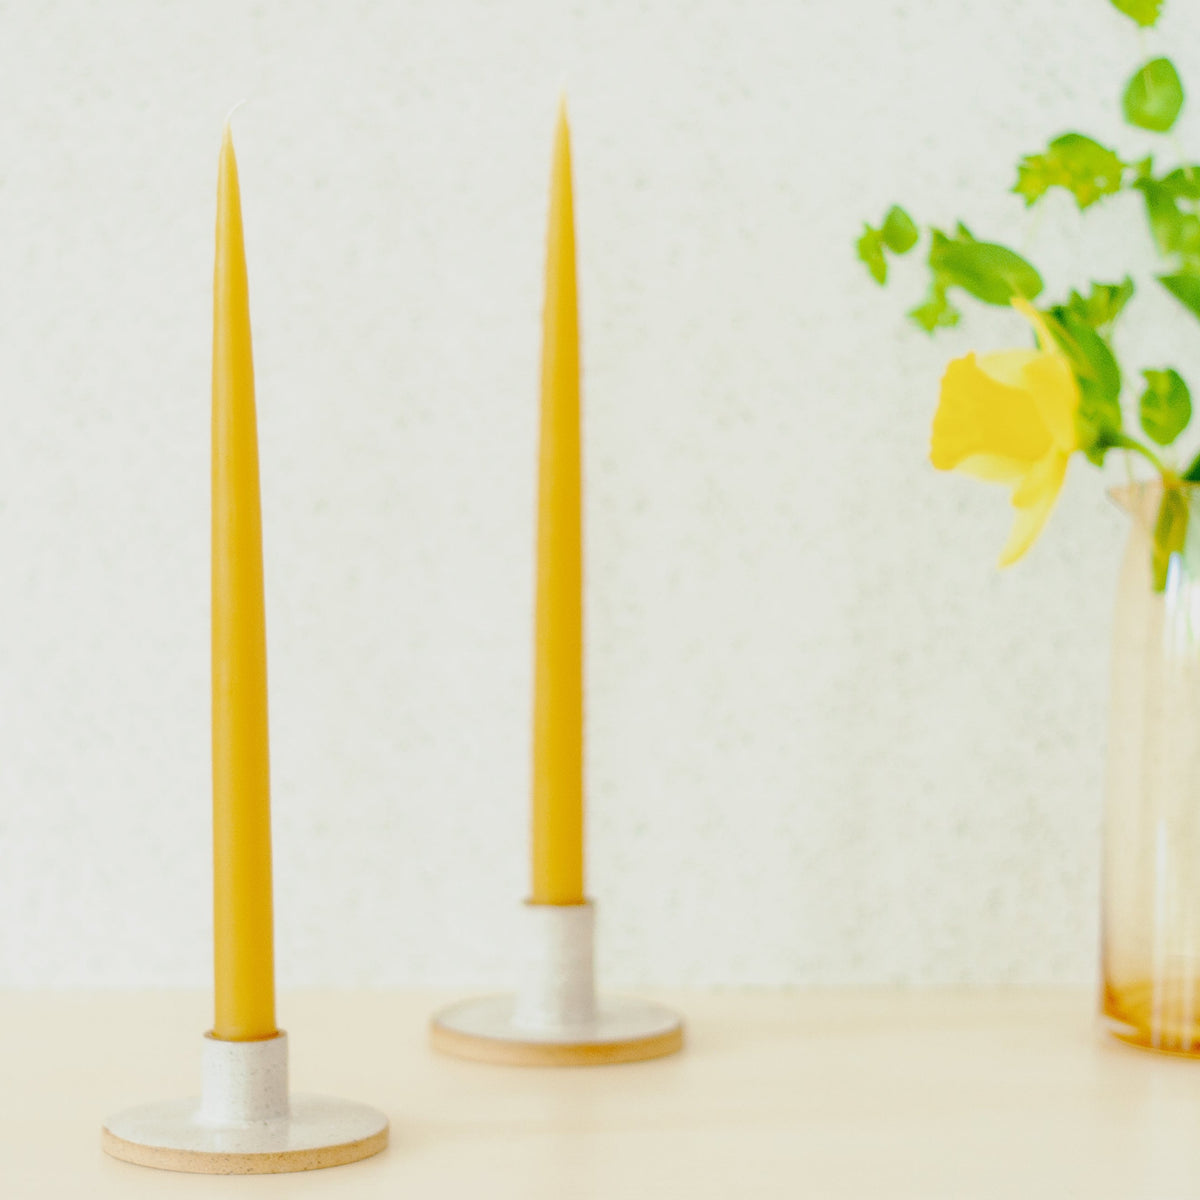 13" Dripless Taper Candles, Set of 2